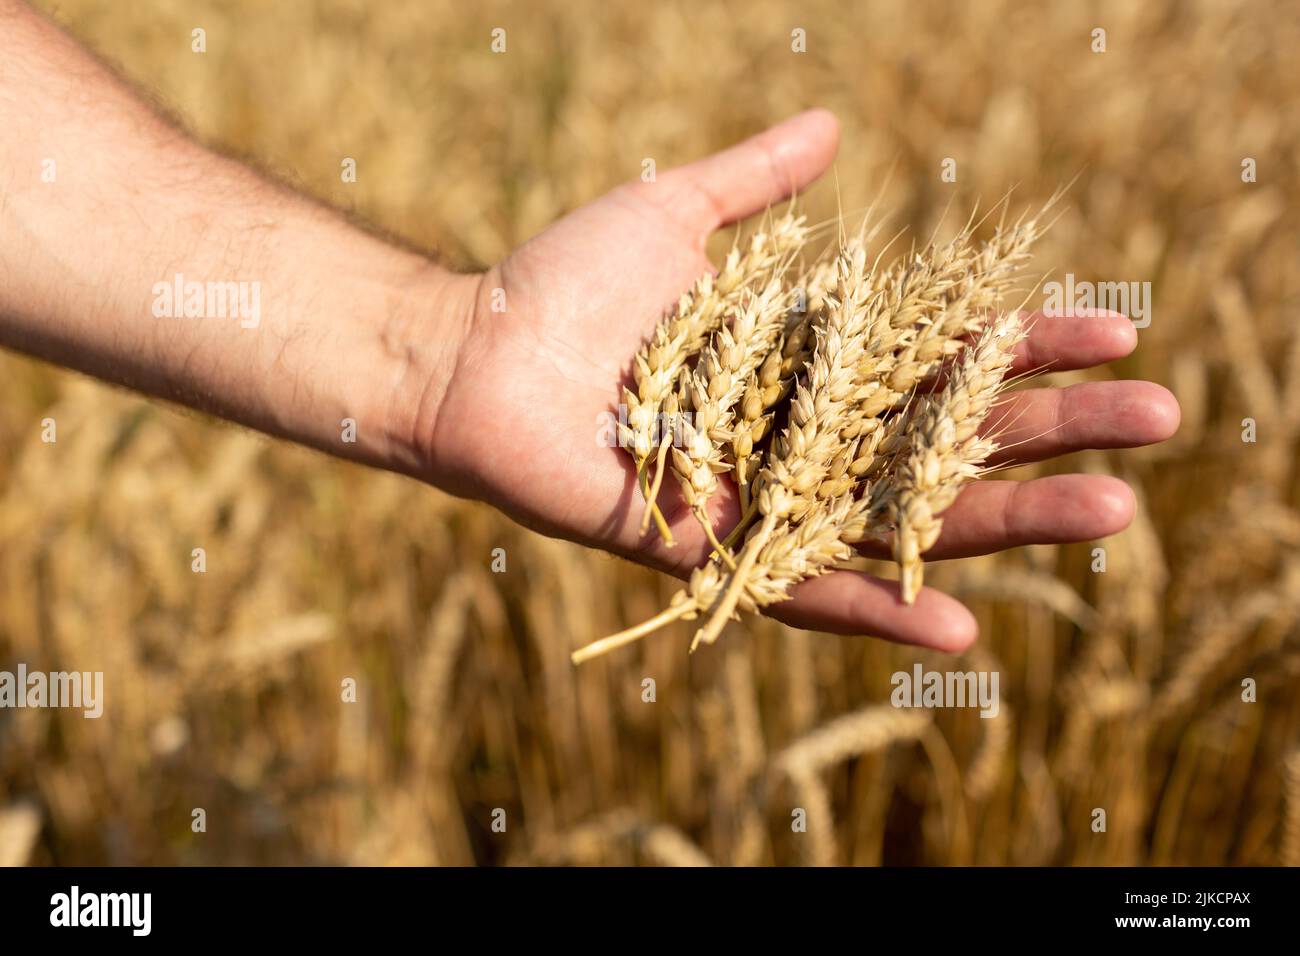 The farmer's hand holds the plucked ears of wheat in his hand Stock Photo